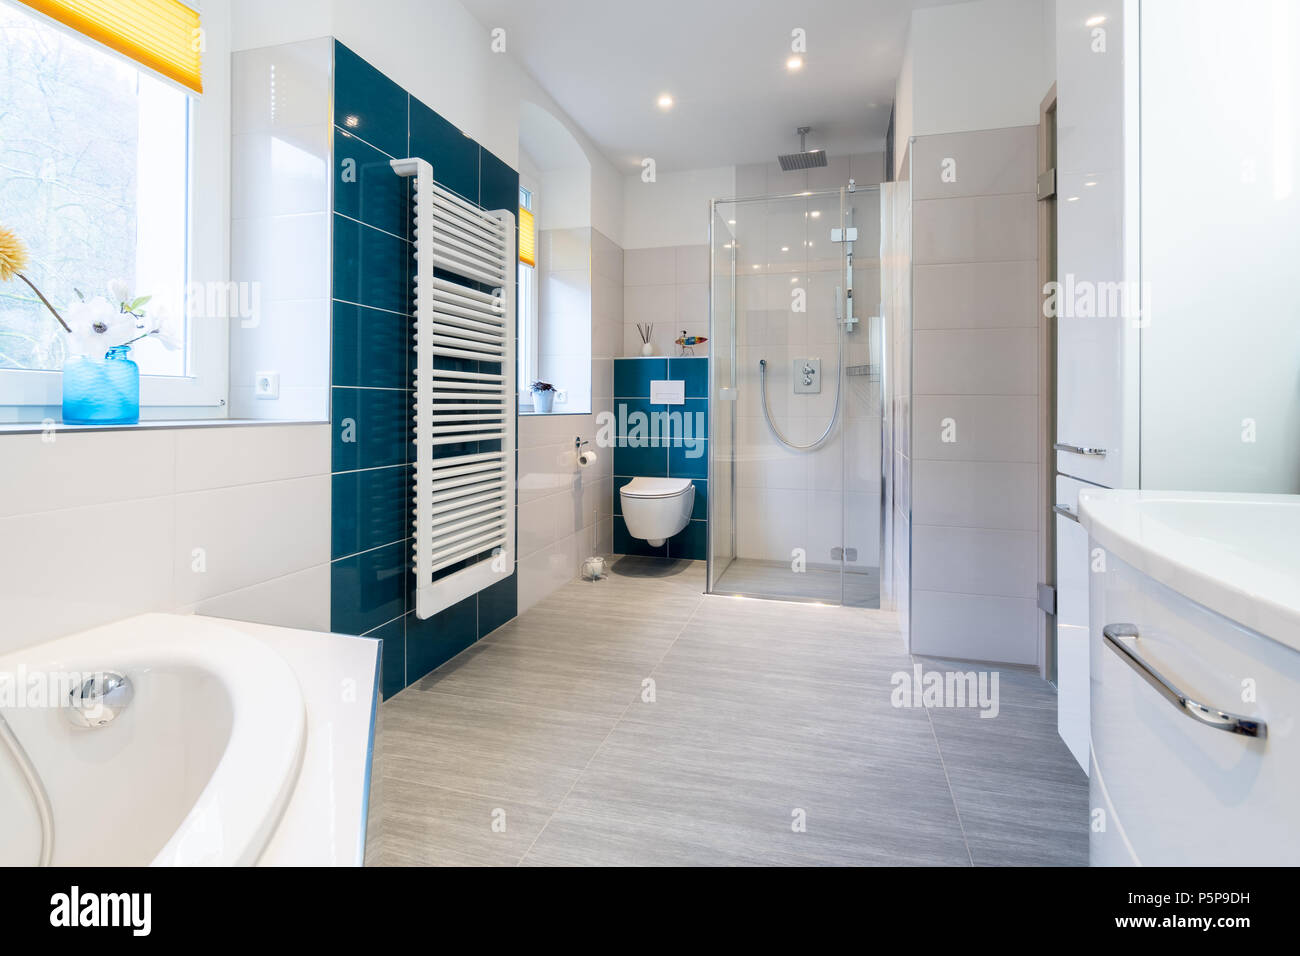 Spacious Bathroom In Blue And White Tones With Heated Floors